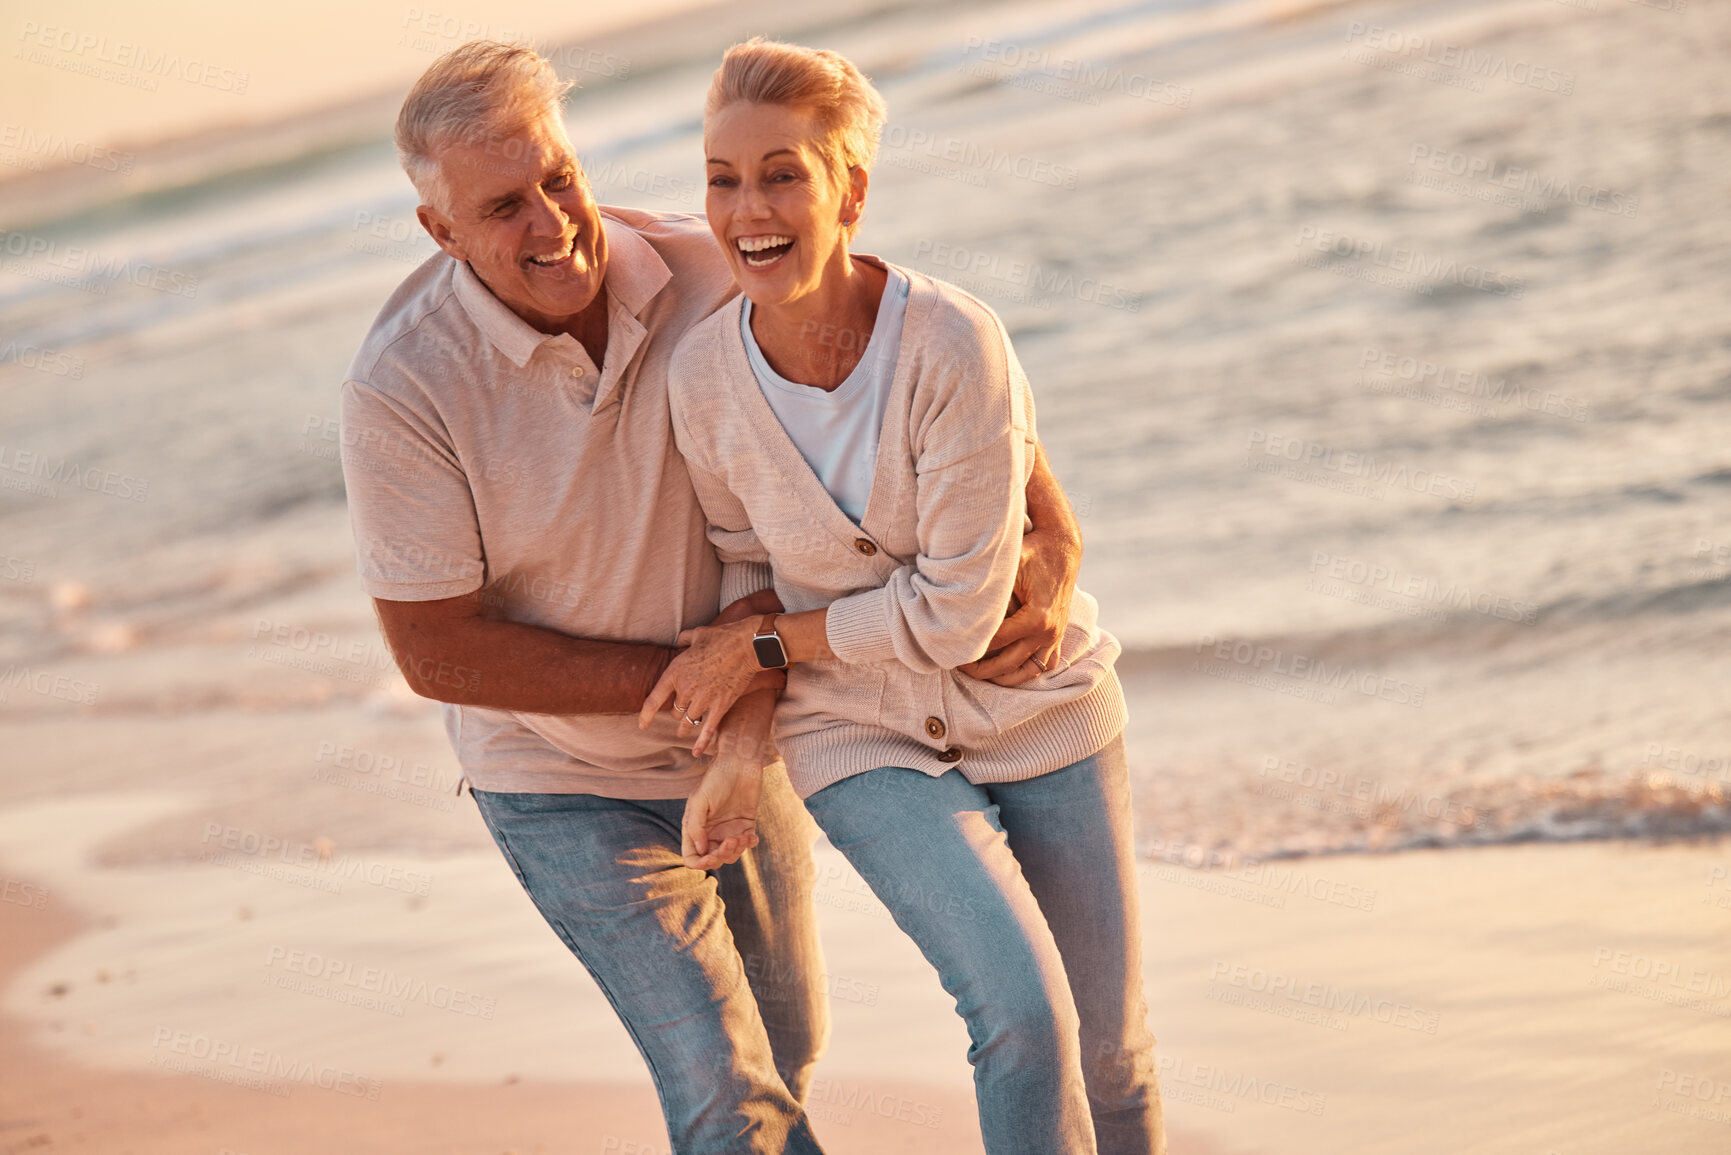 Buy stock photo Couple, retirement and travel to the beach, hug and love, fun together and spending quality time outdoor by the ocean. Senior man, woman and happy, smile on adventure and out in nature at sea.